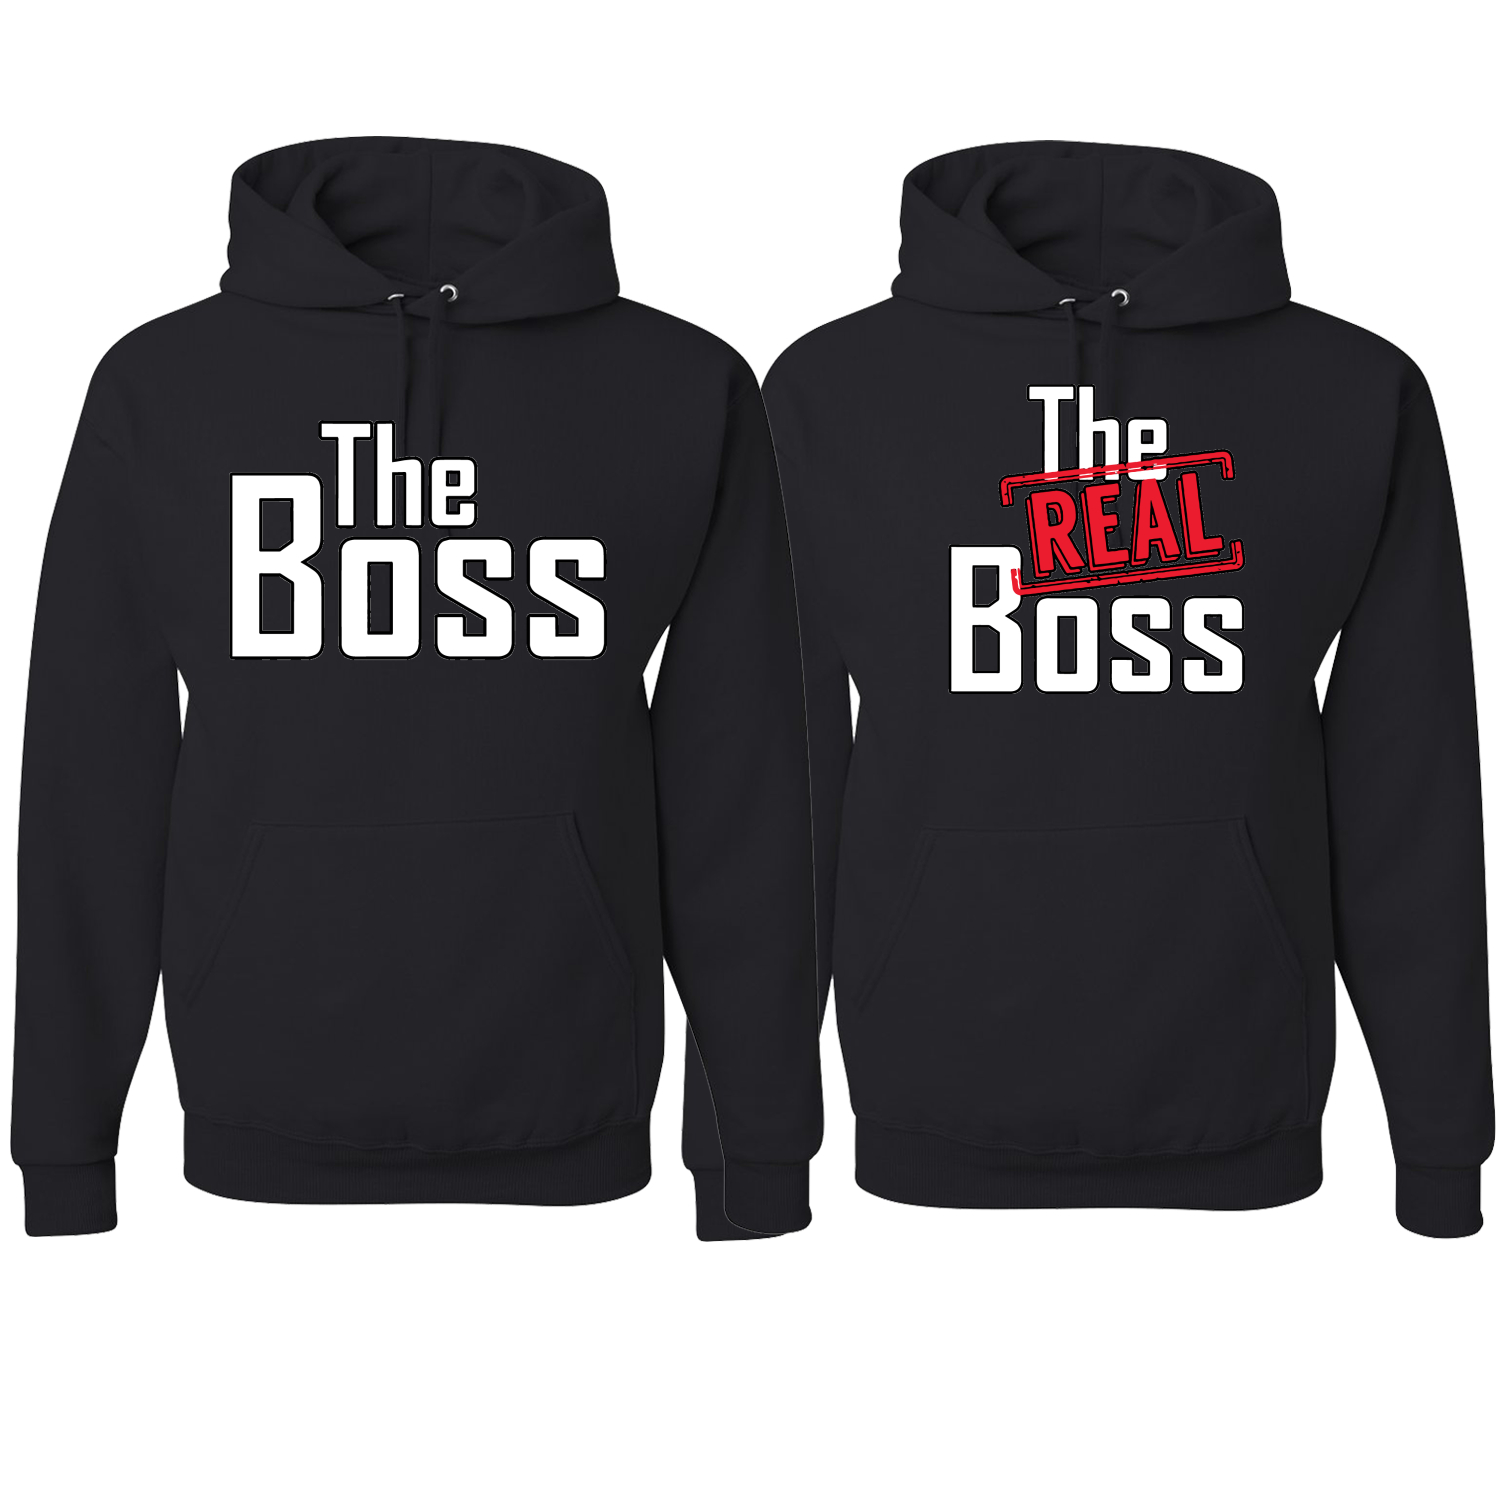 Wild Bobby, The Boss The Real Boss Funny Girlfriend Boyfriend Gift His and Hers Matching Couples Hoodie Sweatshirts Set , Black, Mens S-Womens S - image 1 of 1